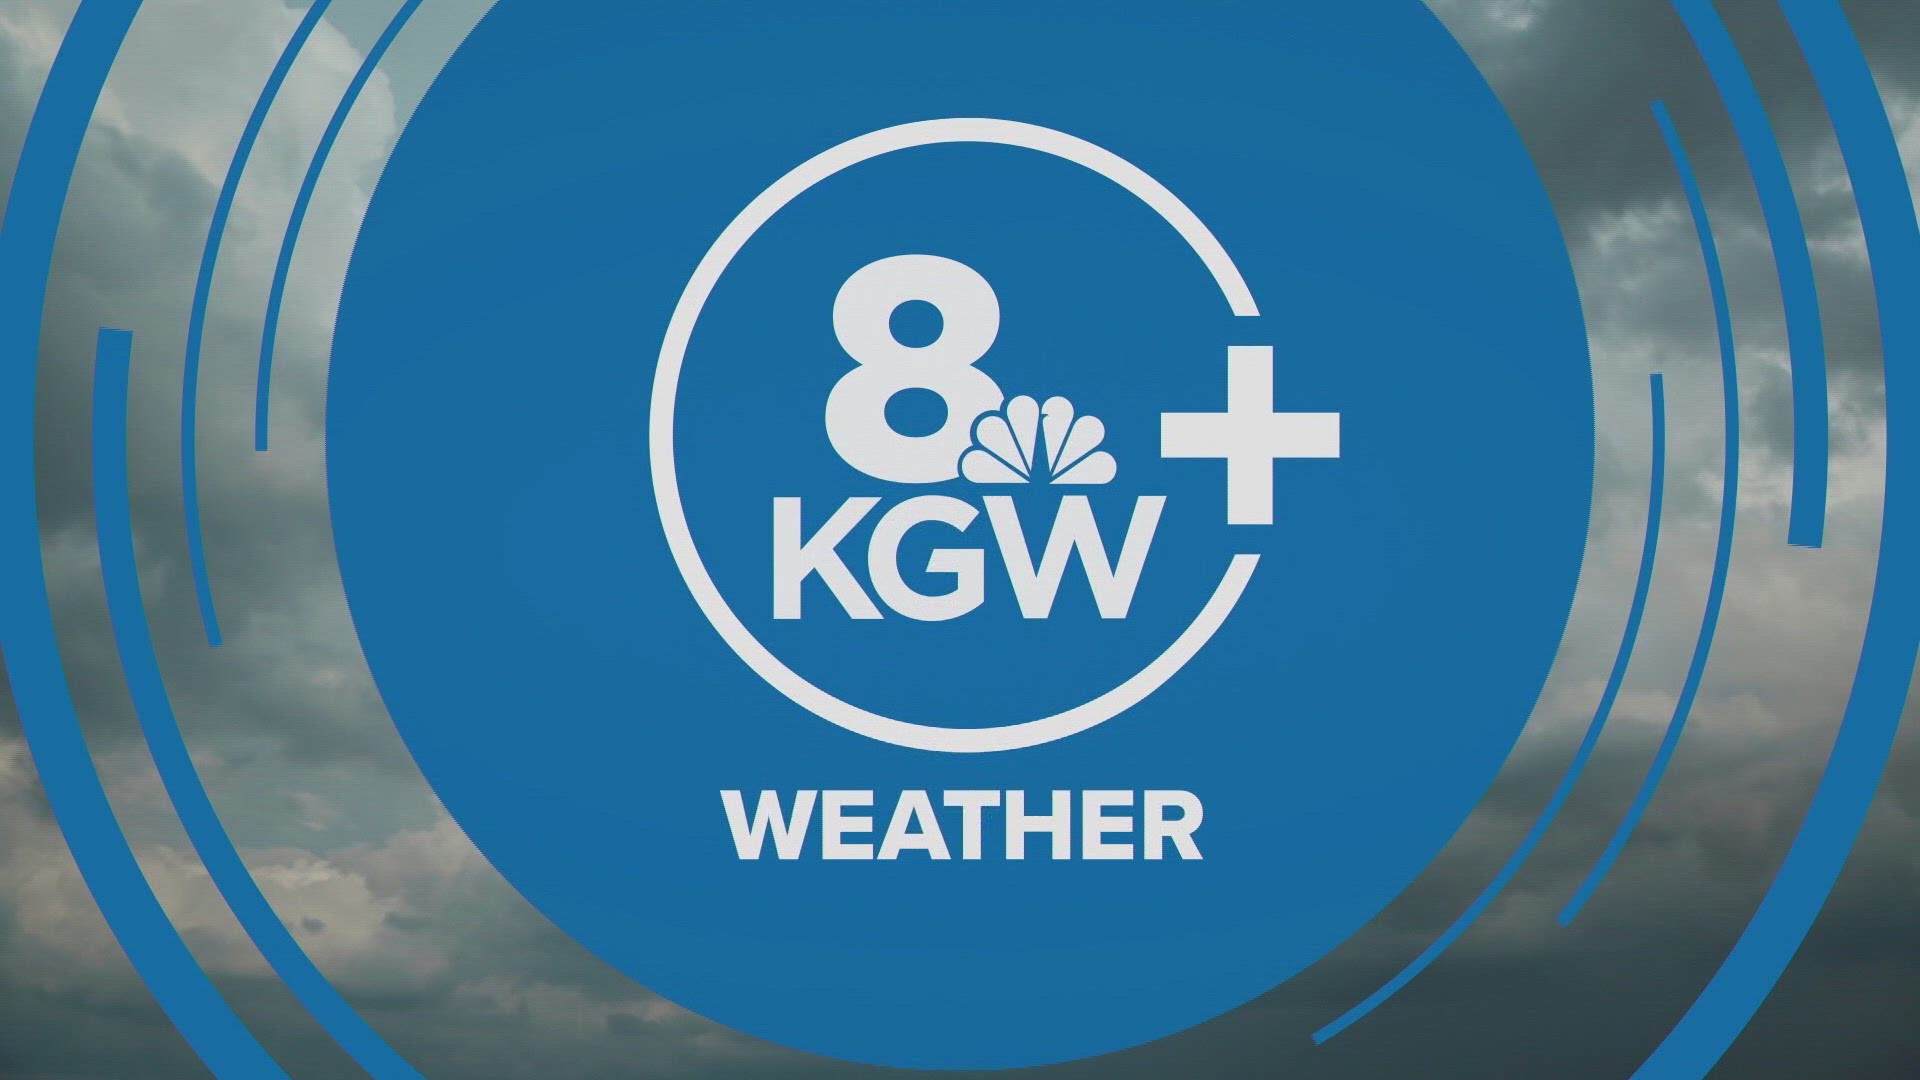 KGW Meteorologist Rod Hill has the KGW+ Weather report for Portland, Oregon and surrounding areas.